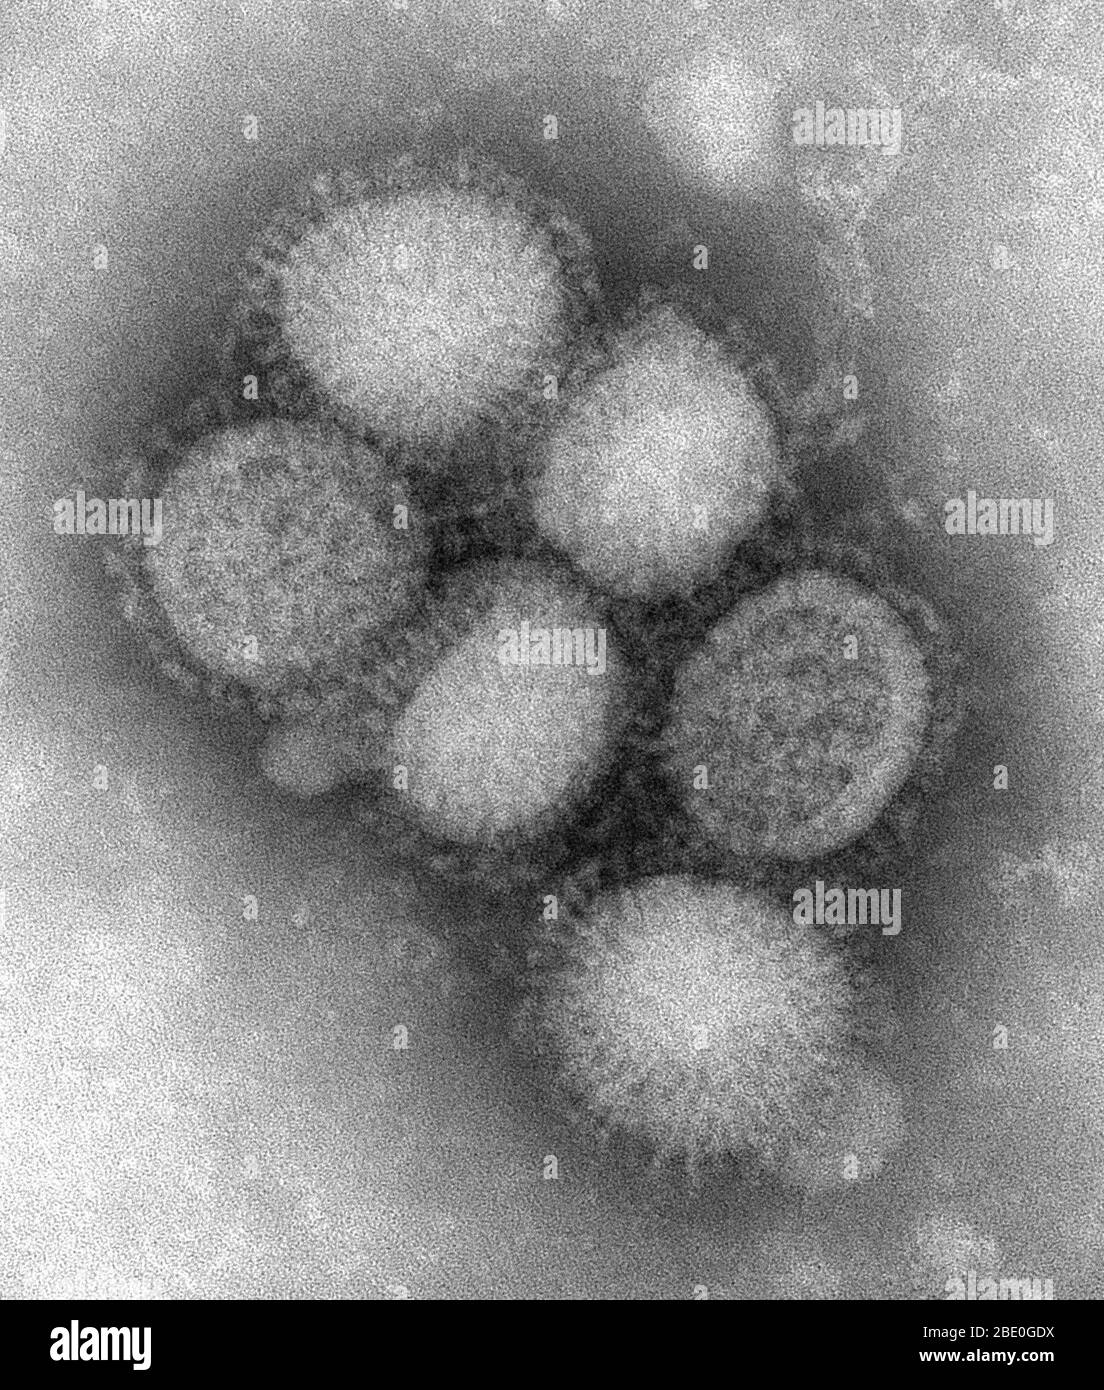 Negative stained transmission electron micrograph (TEM) of some of the ultrastructural morphology of the A/CA/4/09 swine flu virus. Swine Influenza (swine flu) is a respiratory disease of pigs caused by type A influenza virus that regularly causes outbreaks of influenza in pigs. Swine flu viruses cause high levels of illness and low death rates in pigs. Swine influenza viruses may circulate among swine throughout the year, but most outbreaks occur during the late fall and winter months similar to outbreaks in humans. The classical swine flu virus (an influenza type A H1N1 virus) was first isol Stock Photo